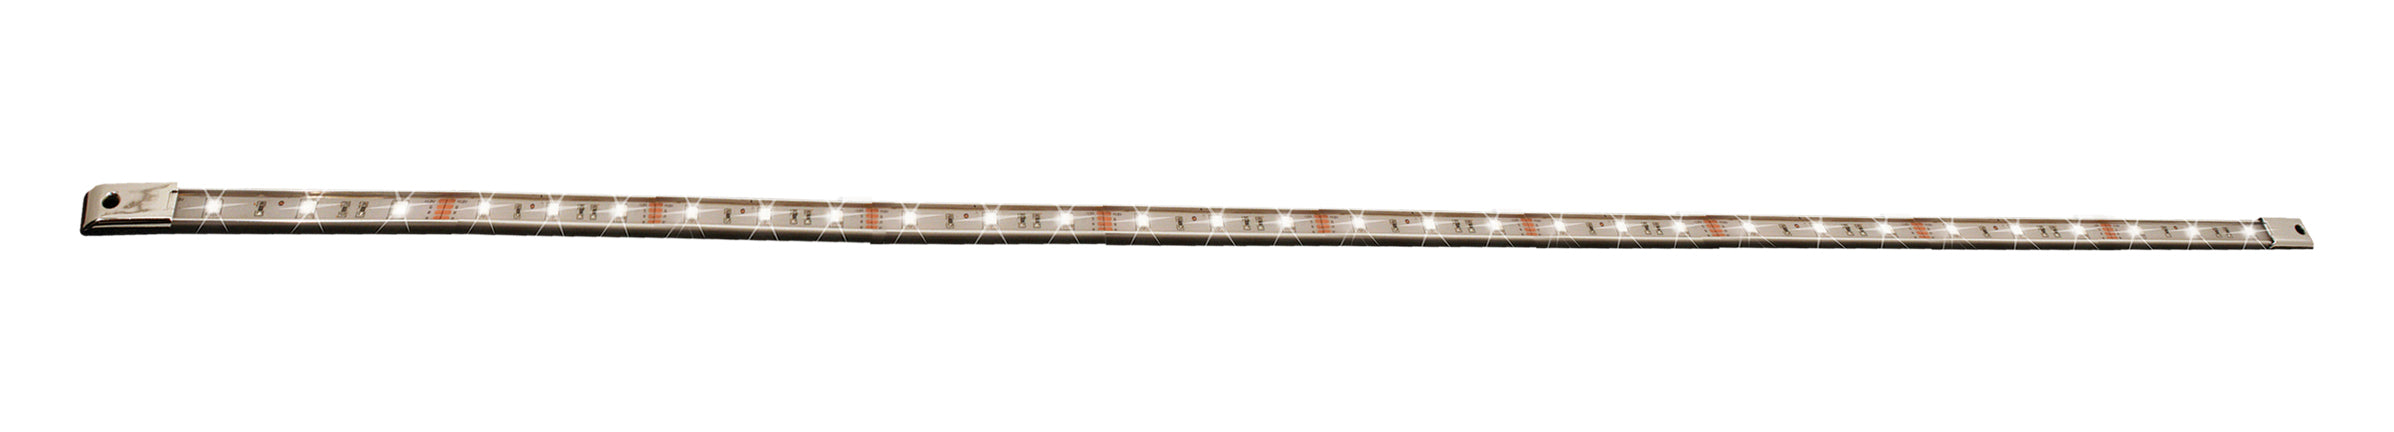 Race Sport ULTRA Series 48in LED Custom Accent Bar Weatherproof Strip with Aluminum Mounting Channel White LED Color RS-U30LEDC48-W